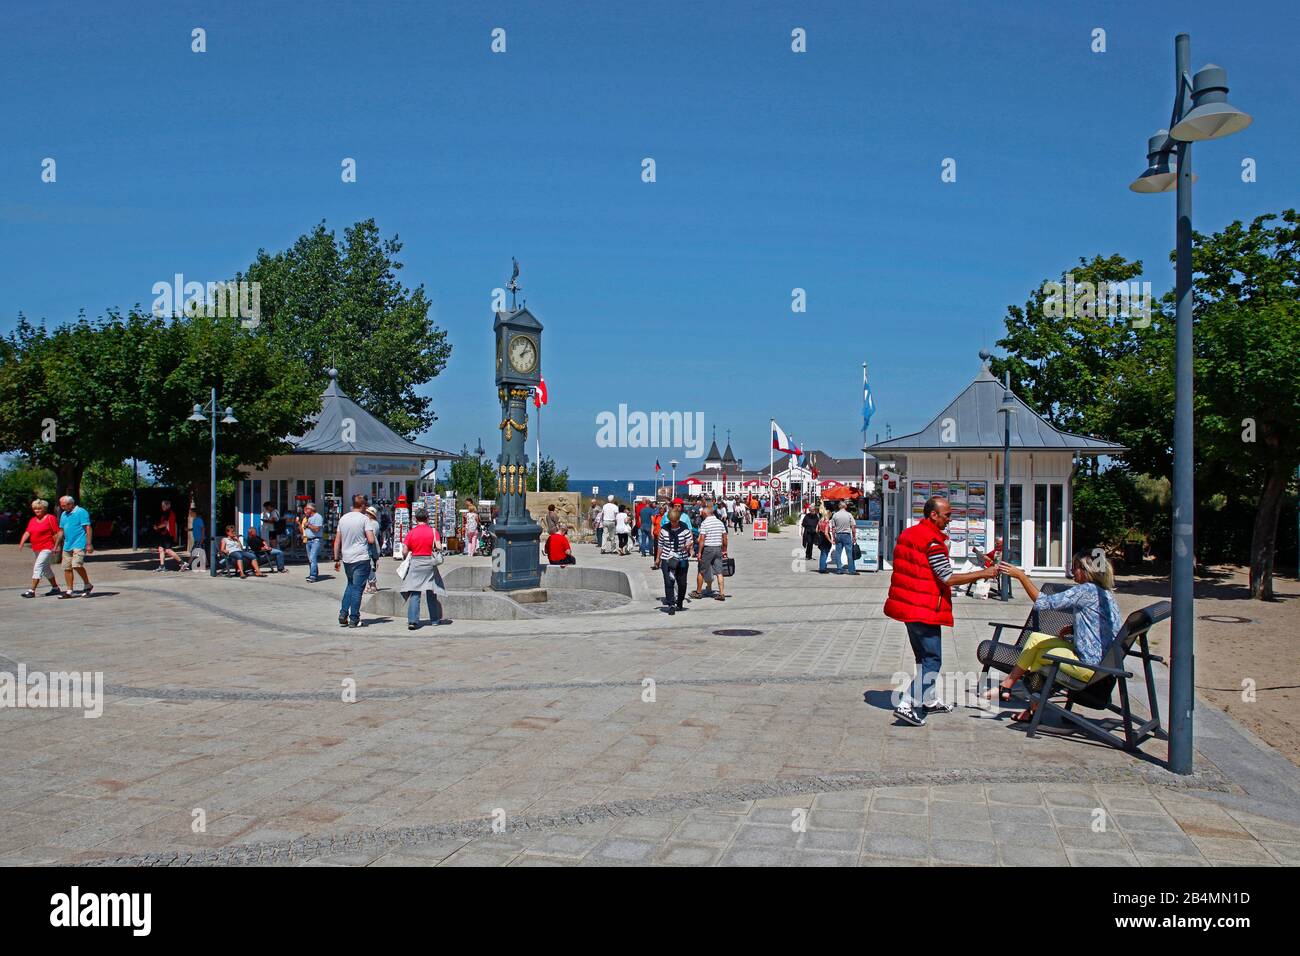 Germany, Mecklenburg-West Pomerania, Ahlbeck seaside resort, Usedom island, Baltic coast, Art Nouveau clock from 1911, pier from 1898, present appearance from 1930, only original pier in Mecklenburg-Western Pomerania, tourists, holidaymakers Stock Photo